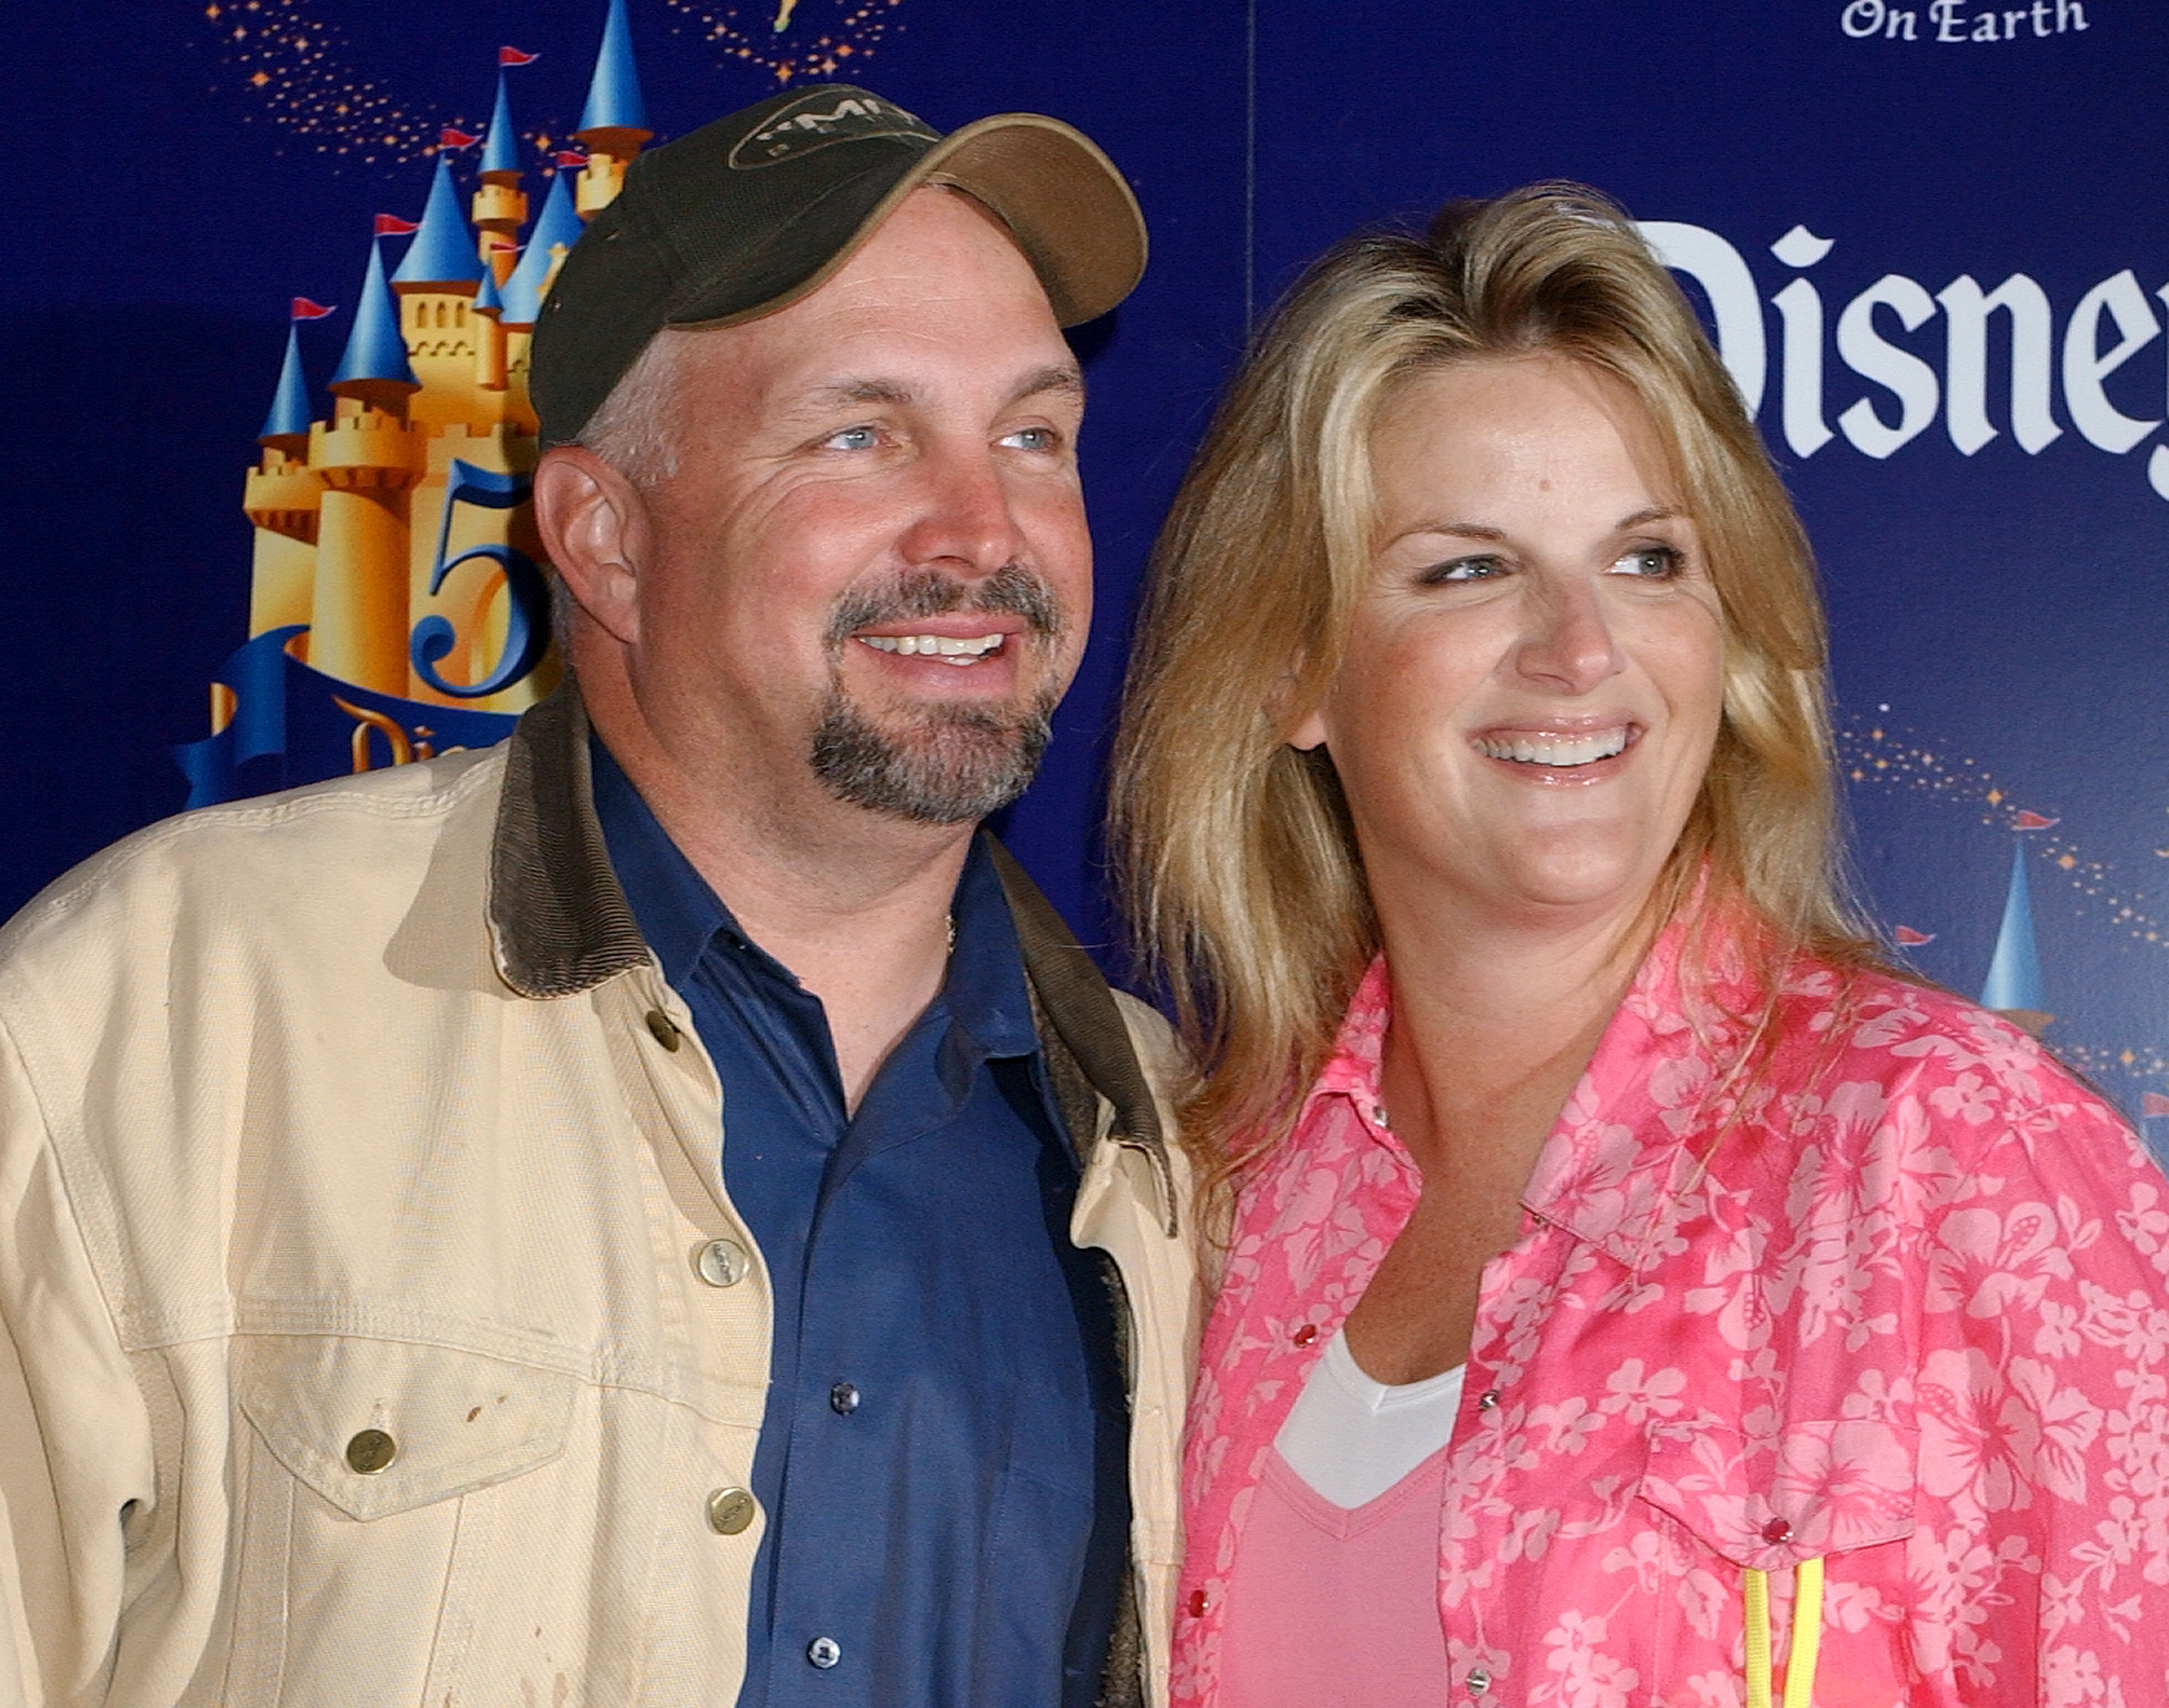 Garth Brooks and his wife Trisha Yearwood during Disneyland 50th Anniversary "Happiest Homecoming On Earth" Celebration at Disneyland on May 4, 2005 in Anaheim, California | Source: Getty Images